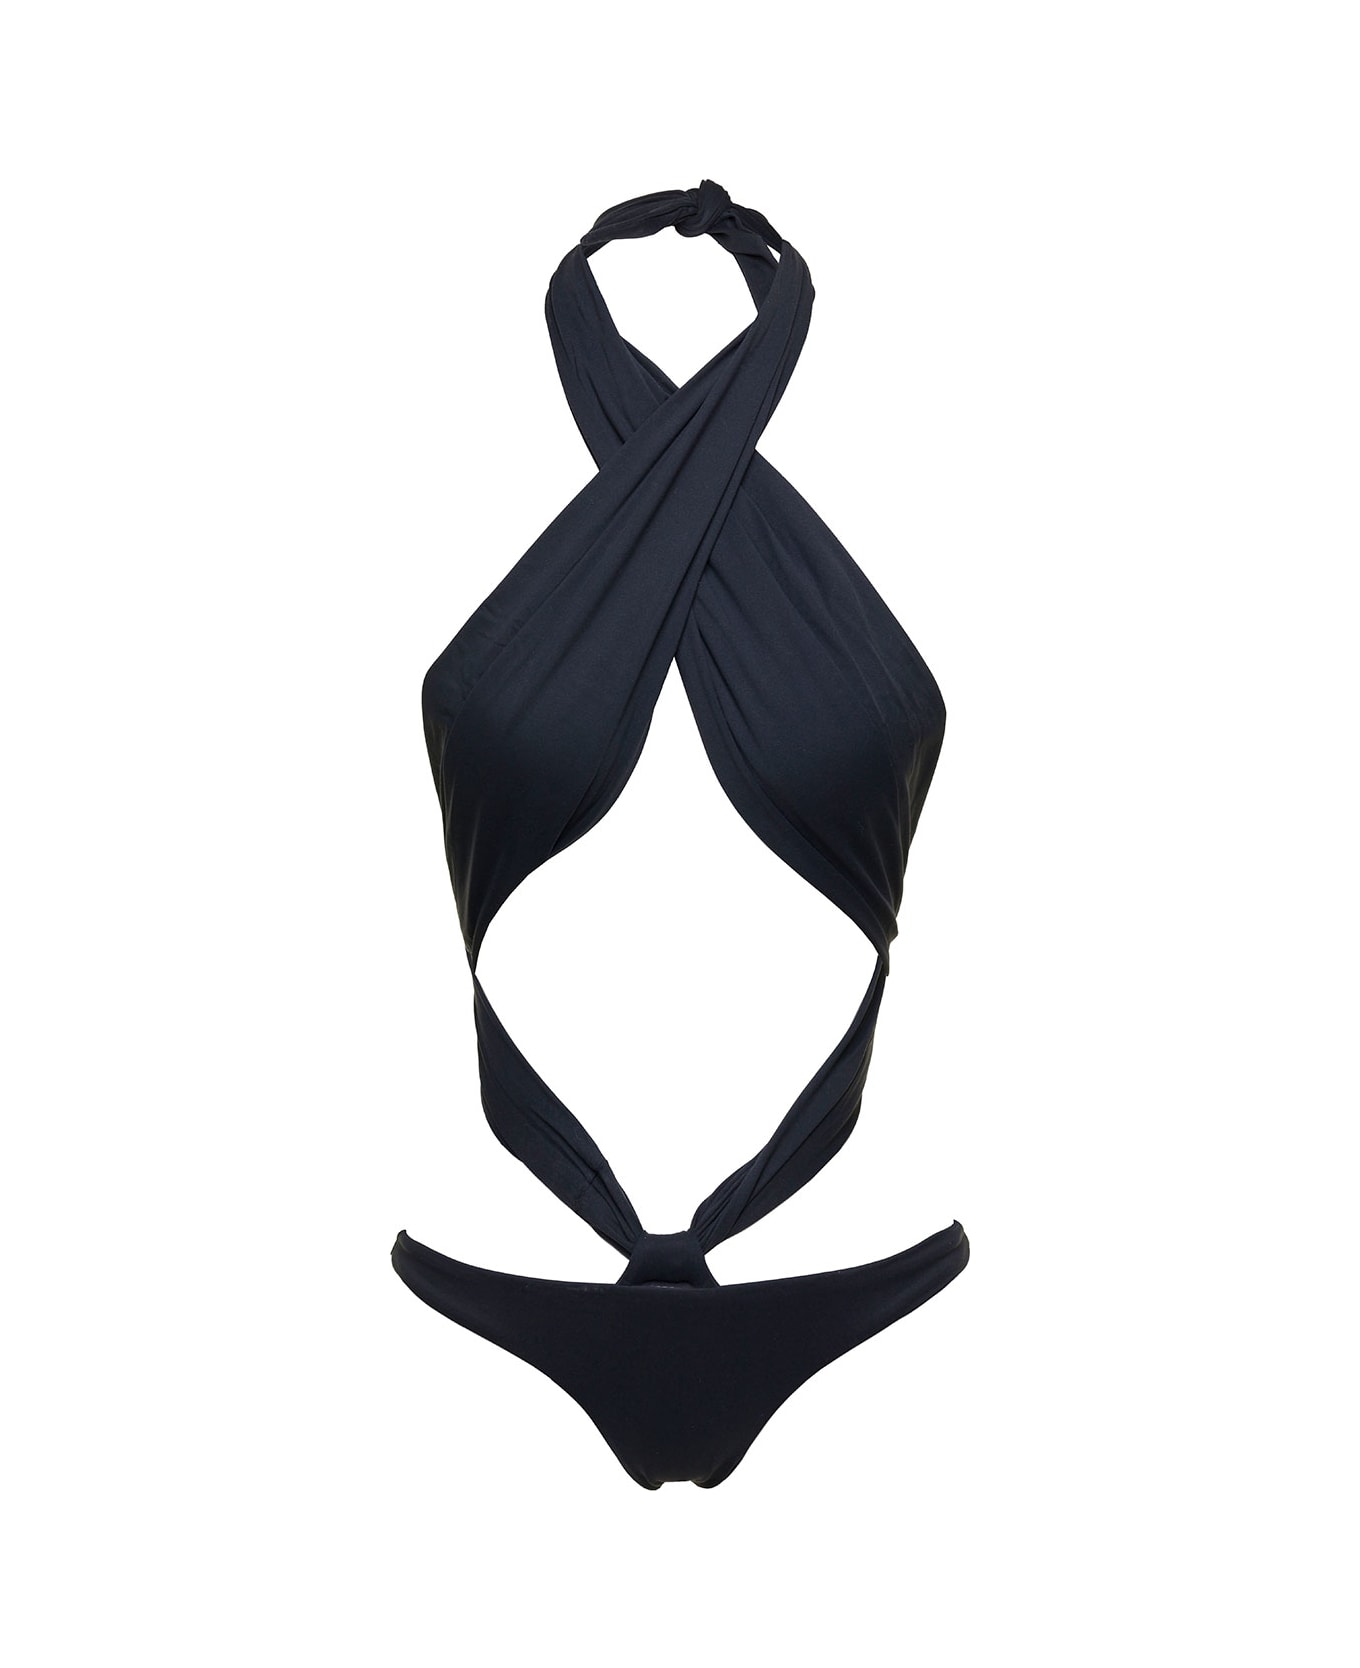 Reina Olga Showpony Swimsuit With Cut-out In Black Polyamide Woman - Black